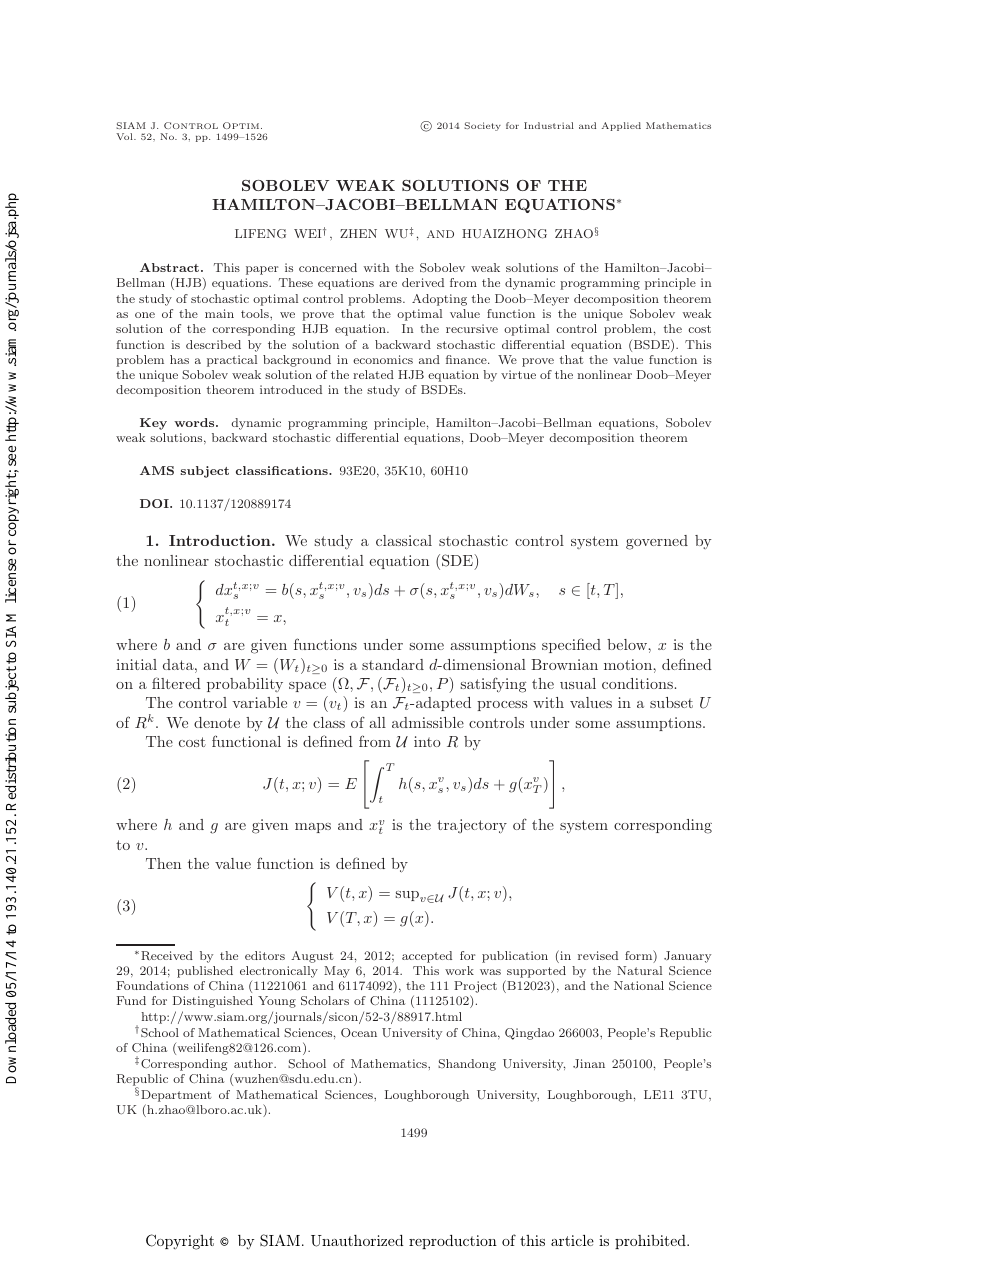 Sobolev Weak Solutions Of The Hamilton Jacobi Bellman Equations Topic Of Research Paper In Mathematics Download Scholarly Article Pdf And Read For Free On Cyberleninka Open Science Hub